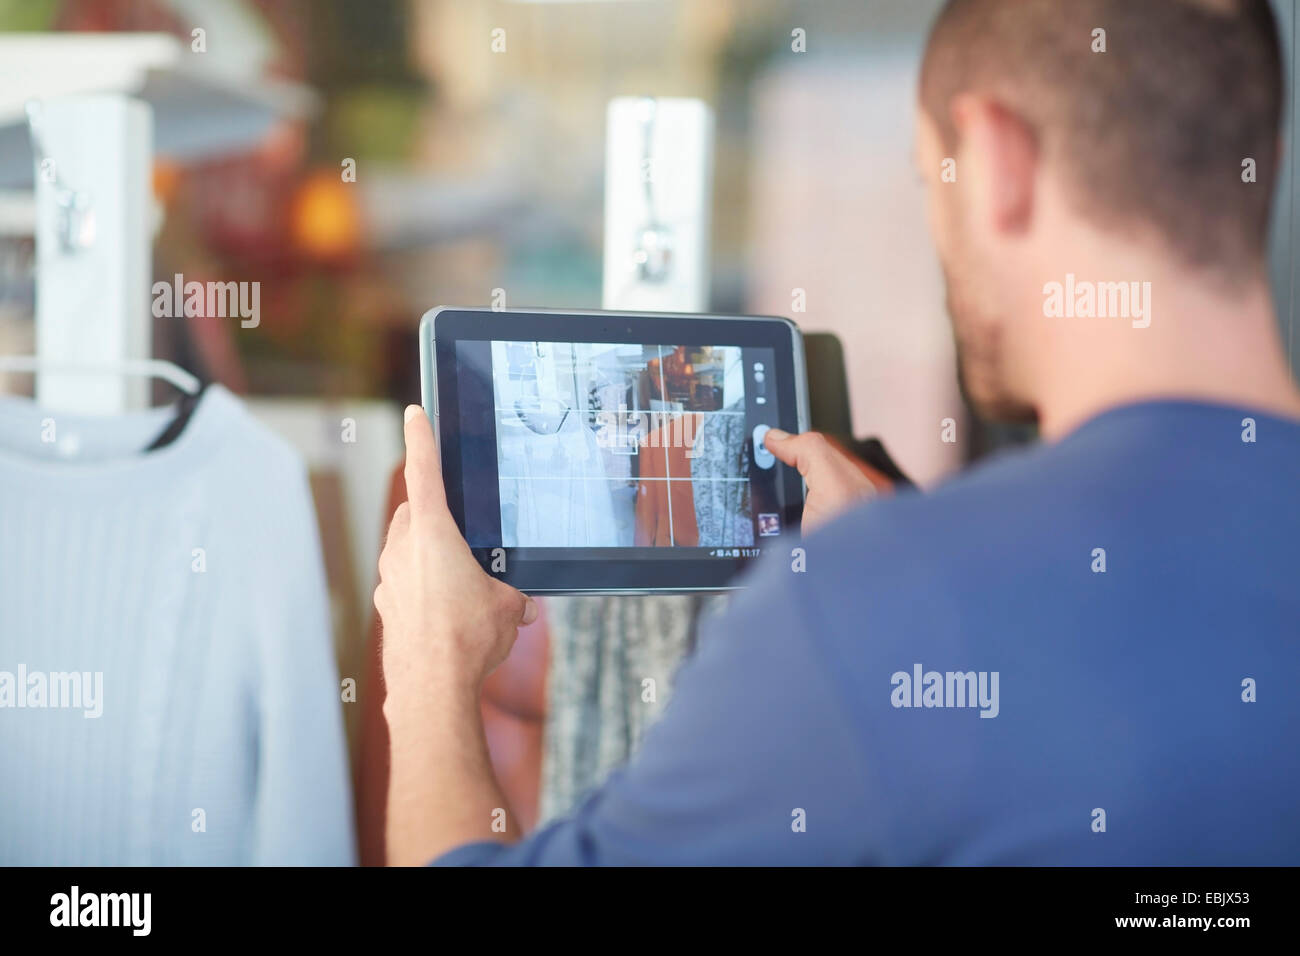 Mid adult man holding digital tablet, taking photograph of shop window Stock Photo